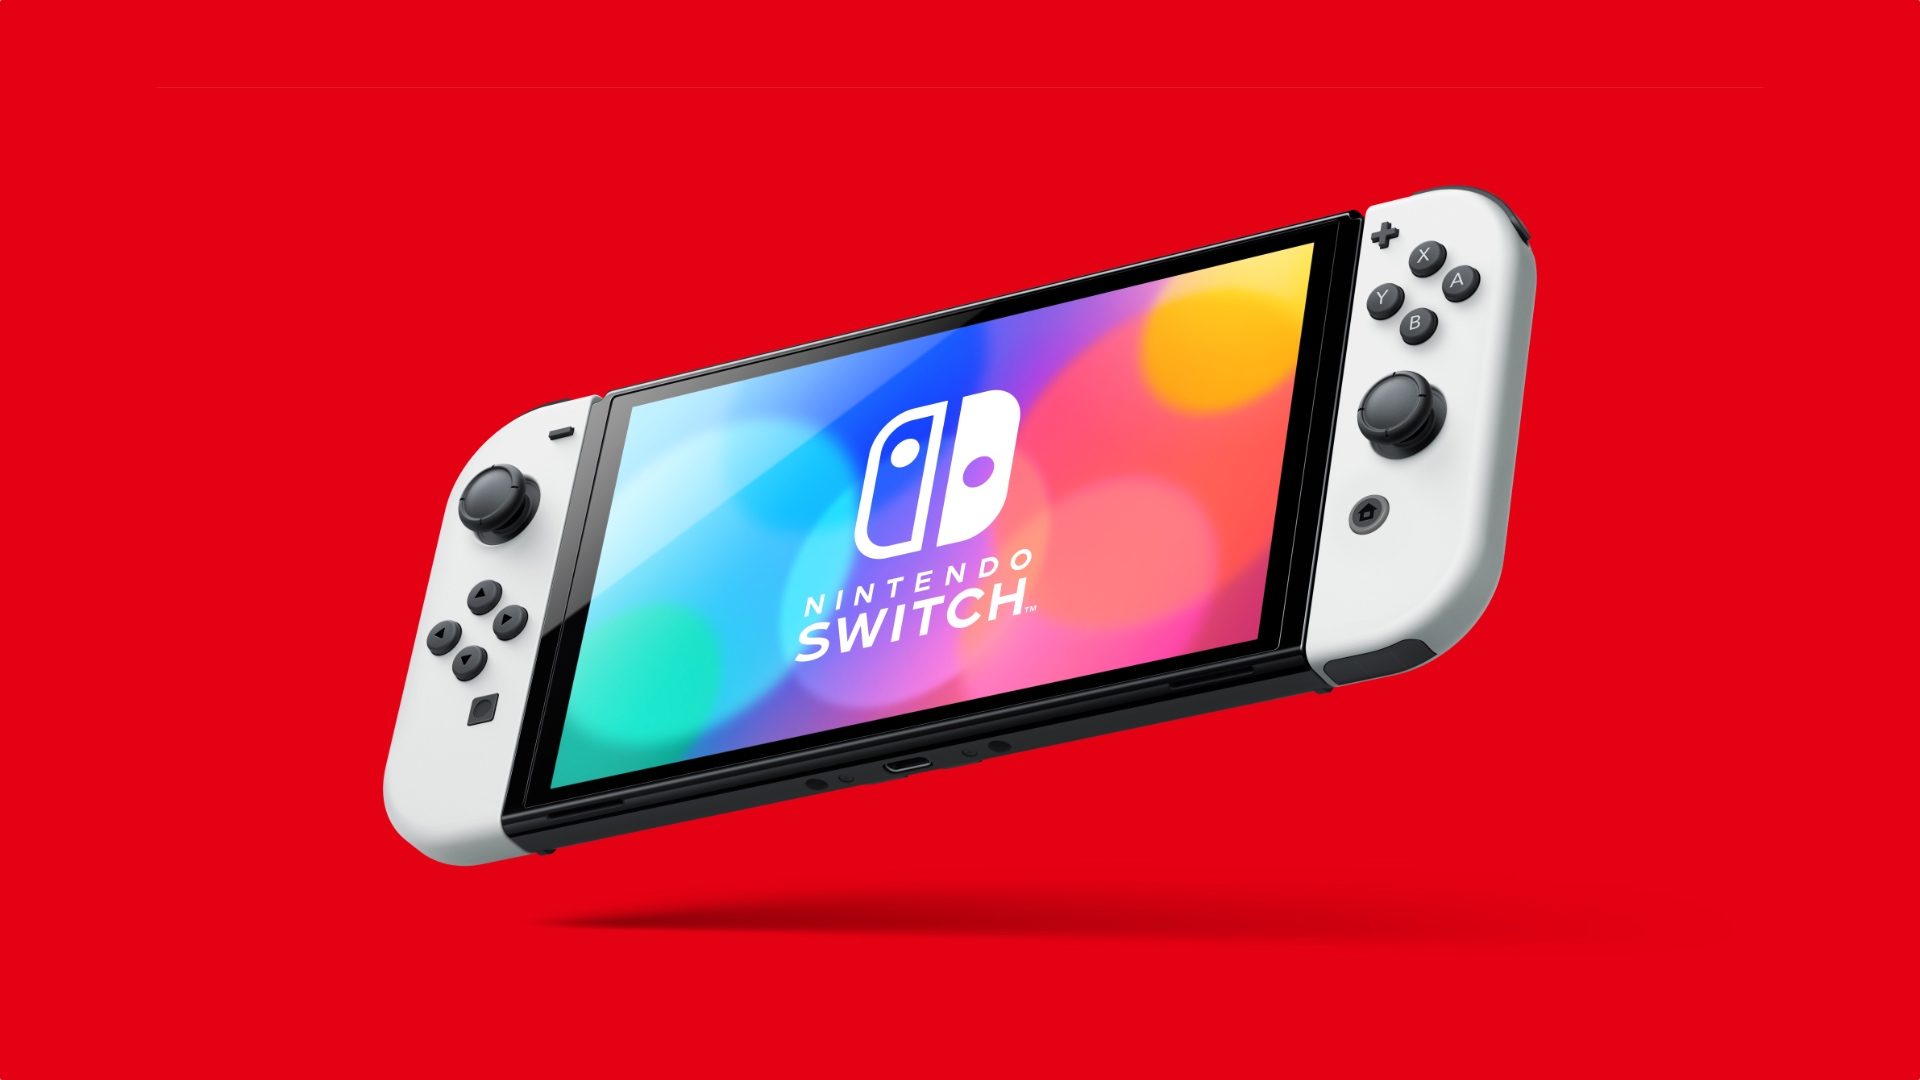 Nintendo Switch updated to work with AirPods and other Bluetooth headphones